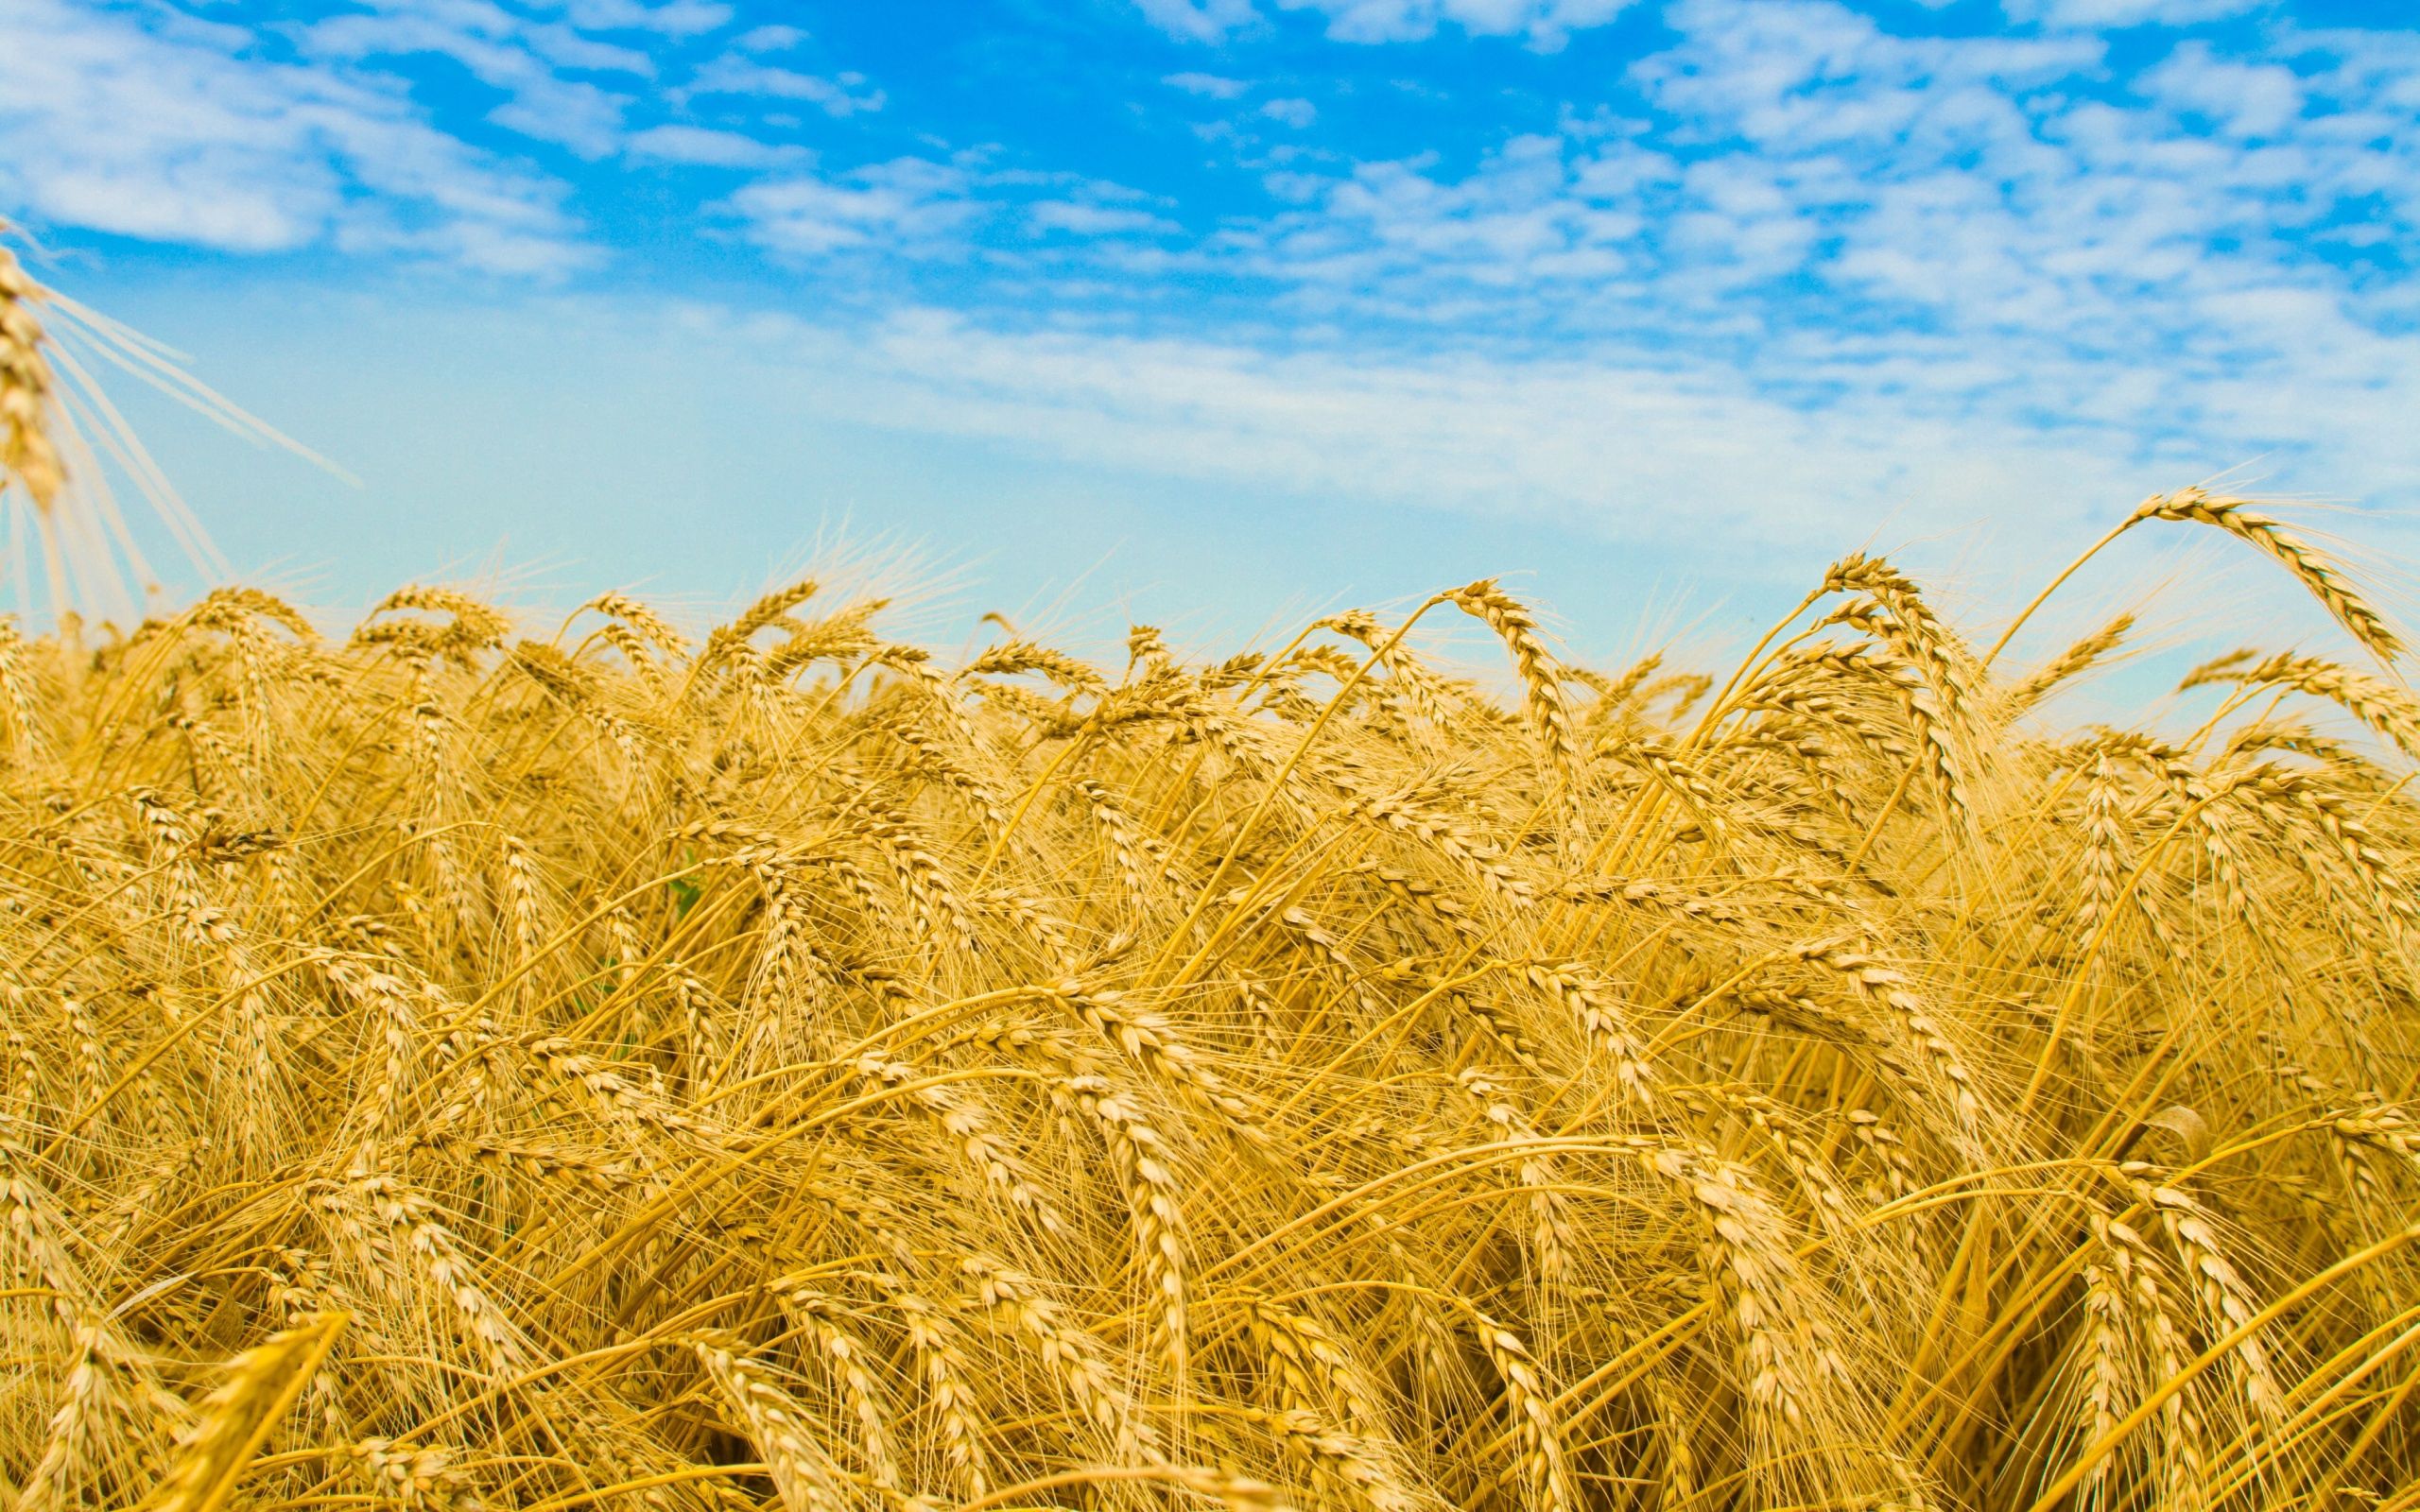 agriculture, spikes, nature, sky, field, ears, golden, rye